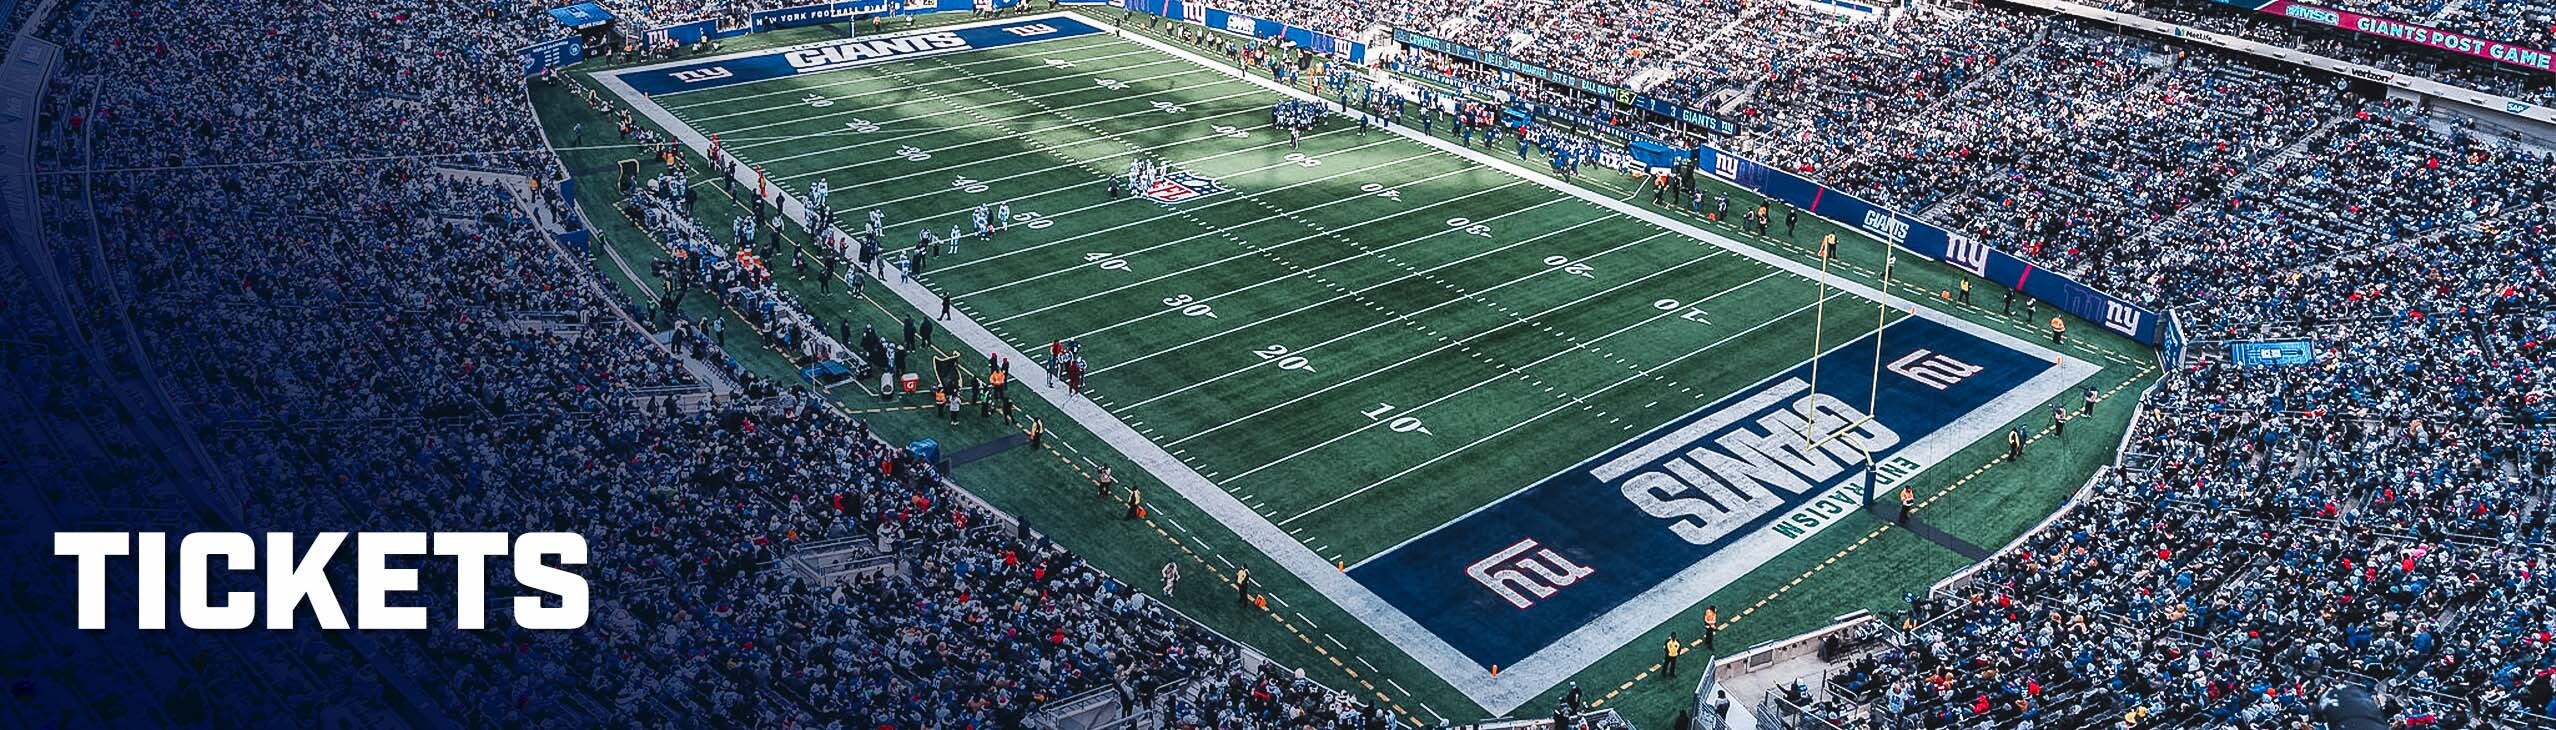 new york giants v packers tickets